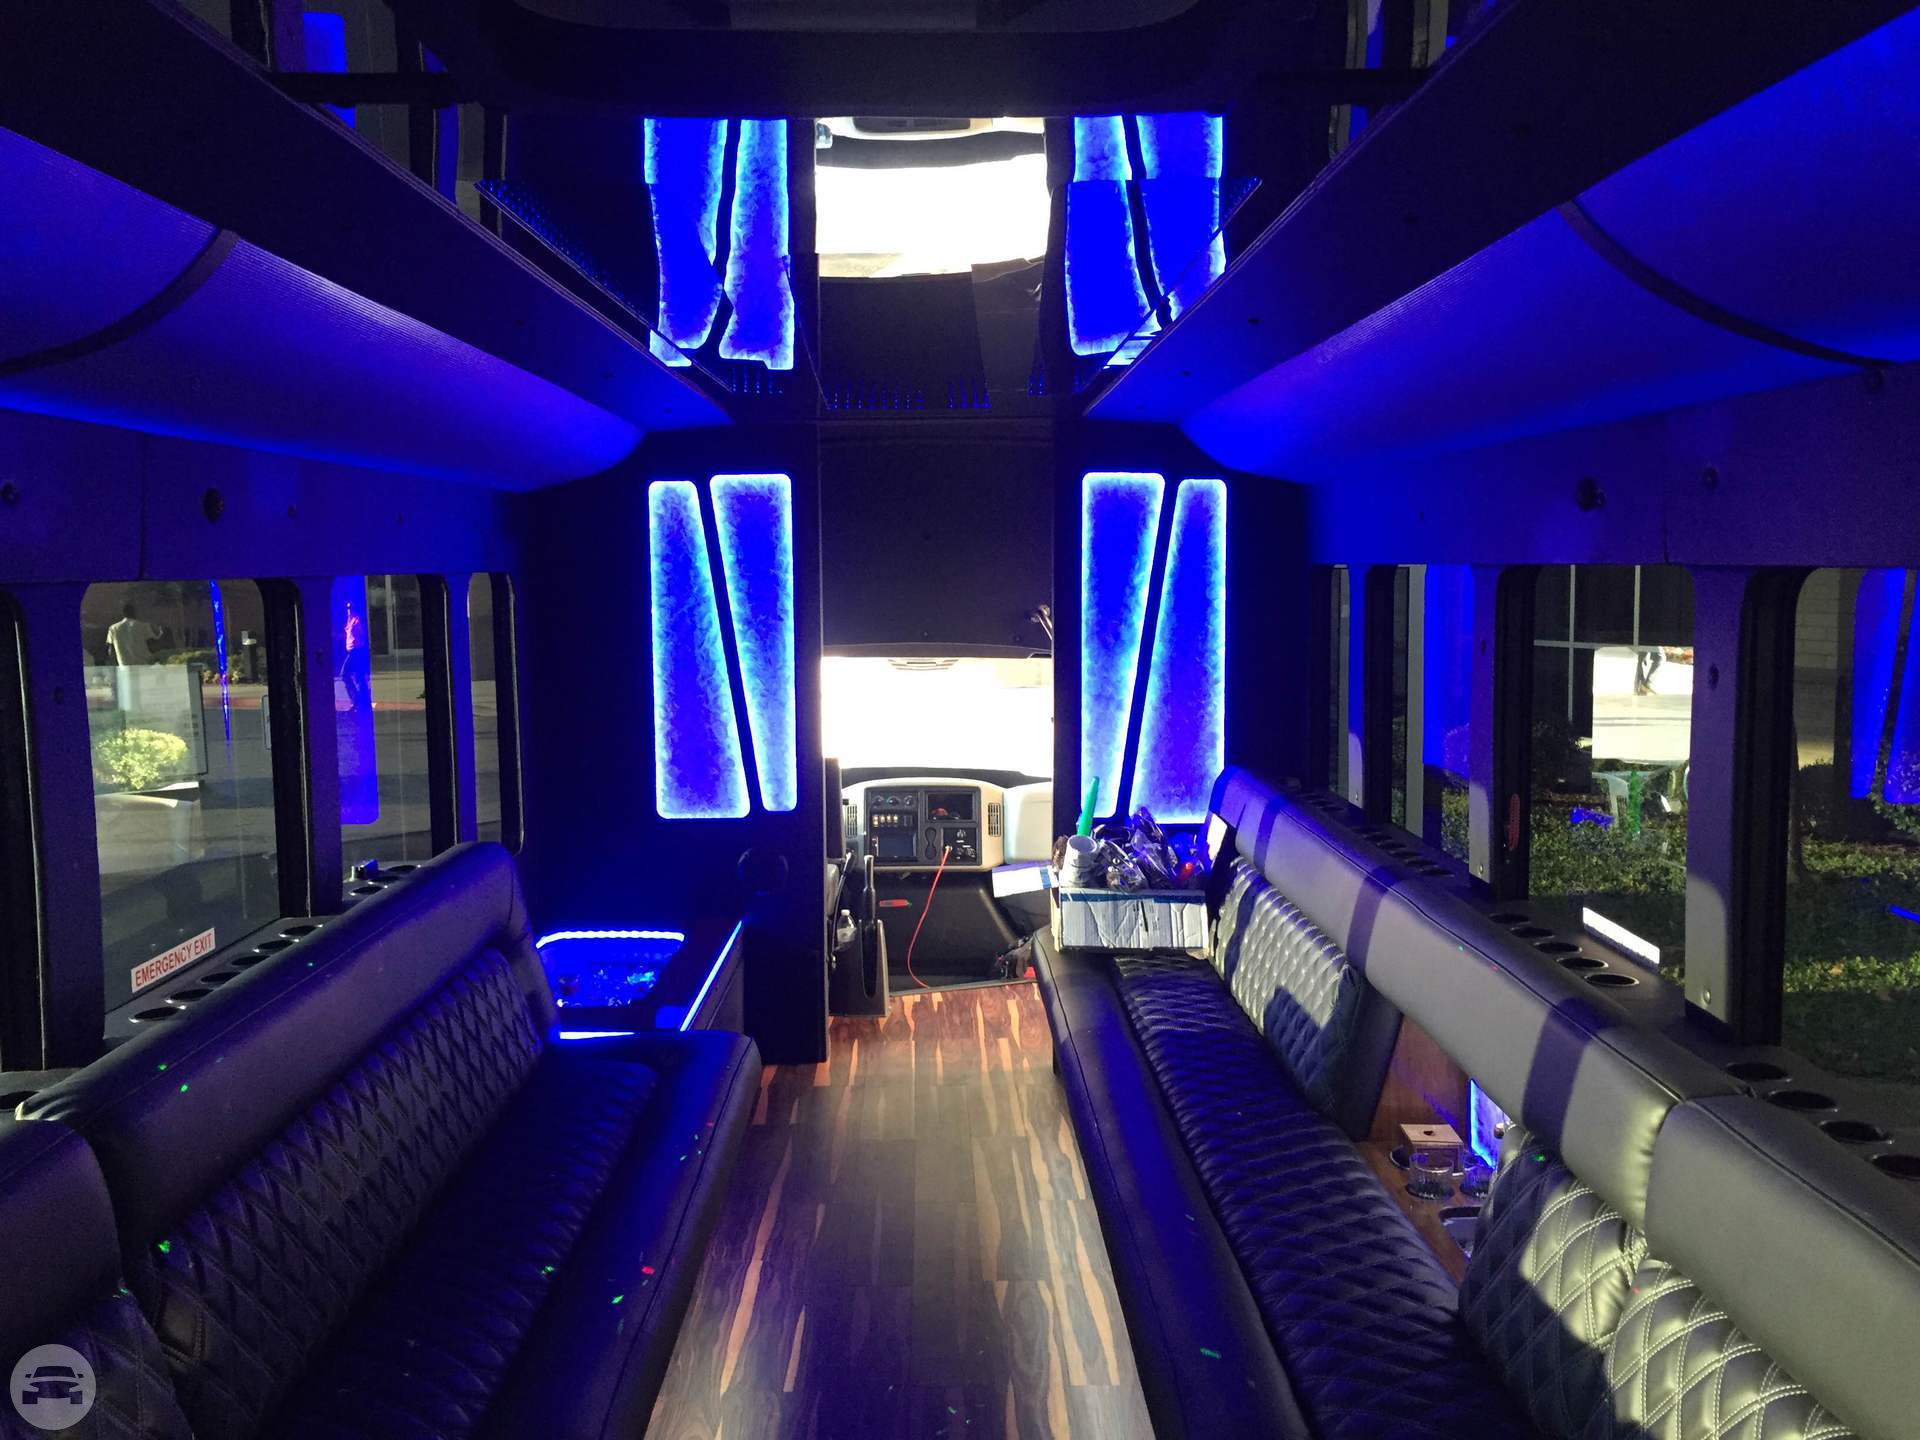 25 Passenger Party Limo Bus
Party Limo Bus /
Rogers, AR

 / Hourly $0.00
